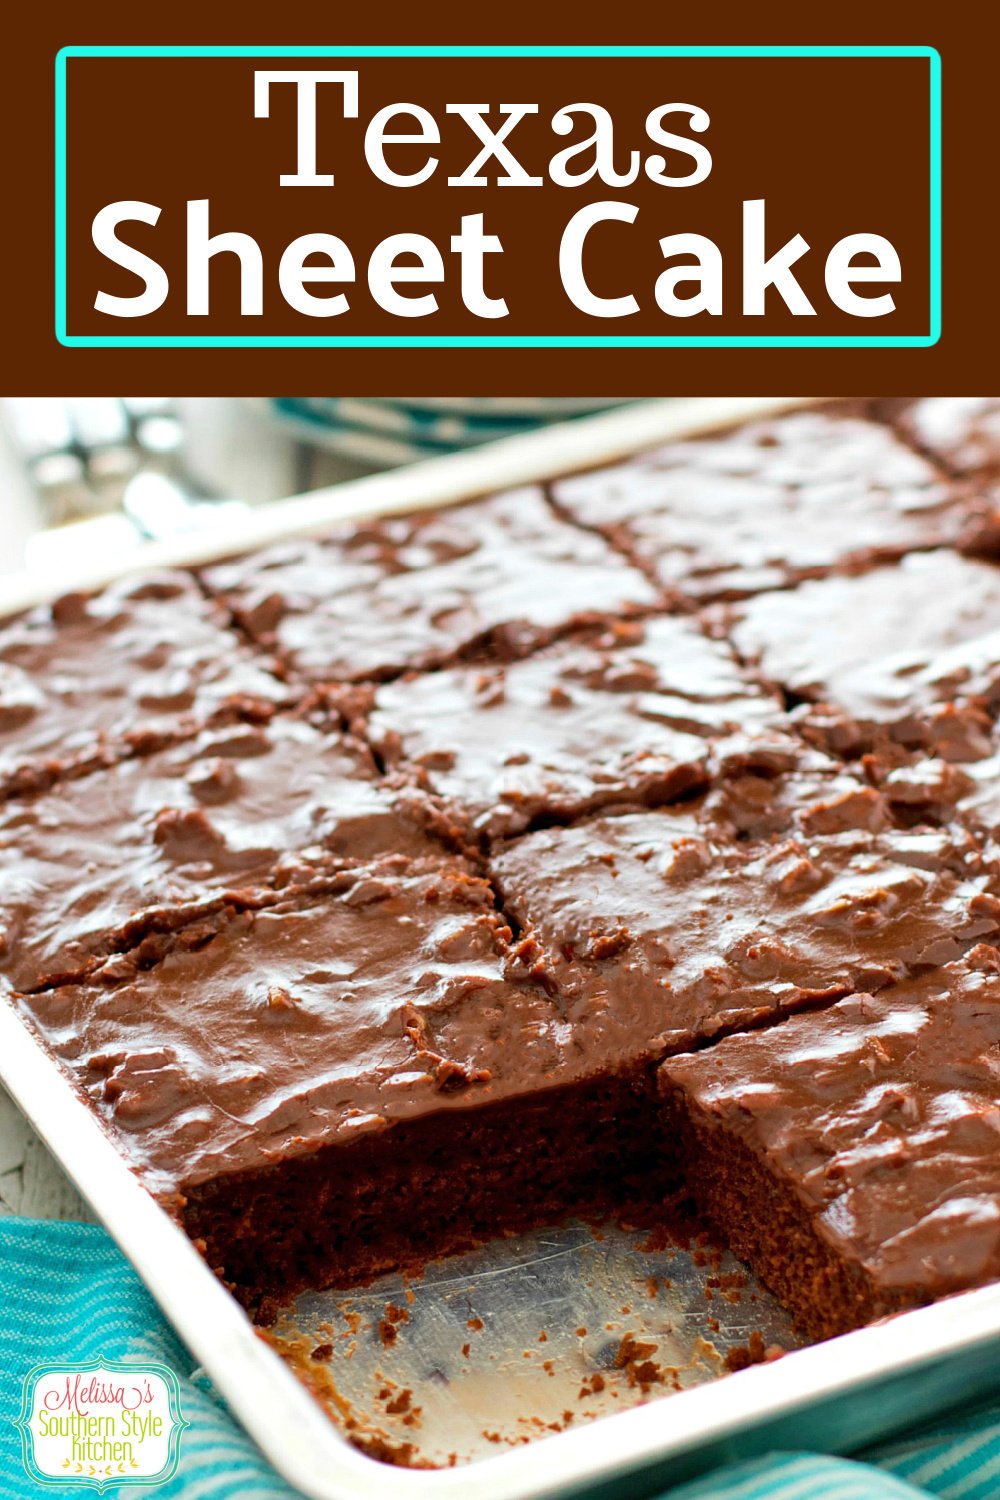 This rich and fudgy Texas Sheet Cake is a delicious option for any special occasion. #texassheetcake #chocolatecake #chocolate #cakes #cakerecipes #desserts #dessertfoodrecipes #holidaybaking #southernfood #southernrecipes #chocolate #picnicdesserts via @melissasssk